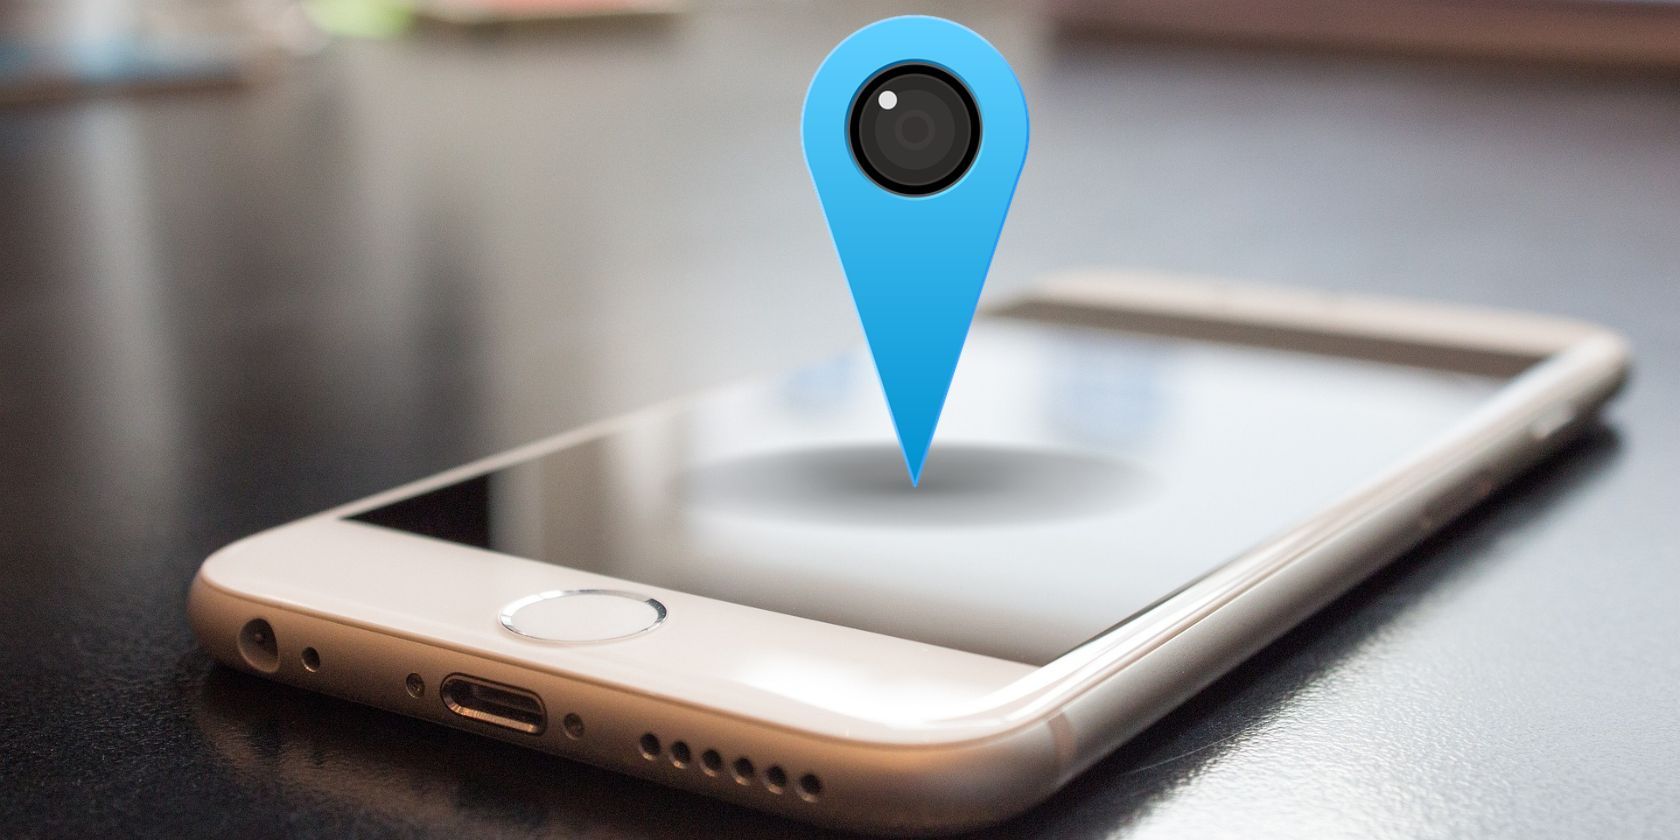 What Apps Need My Location?